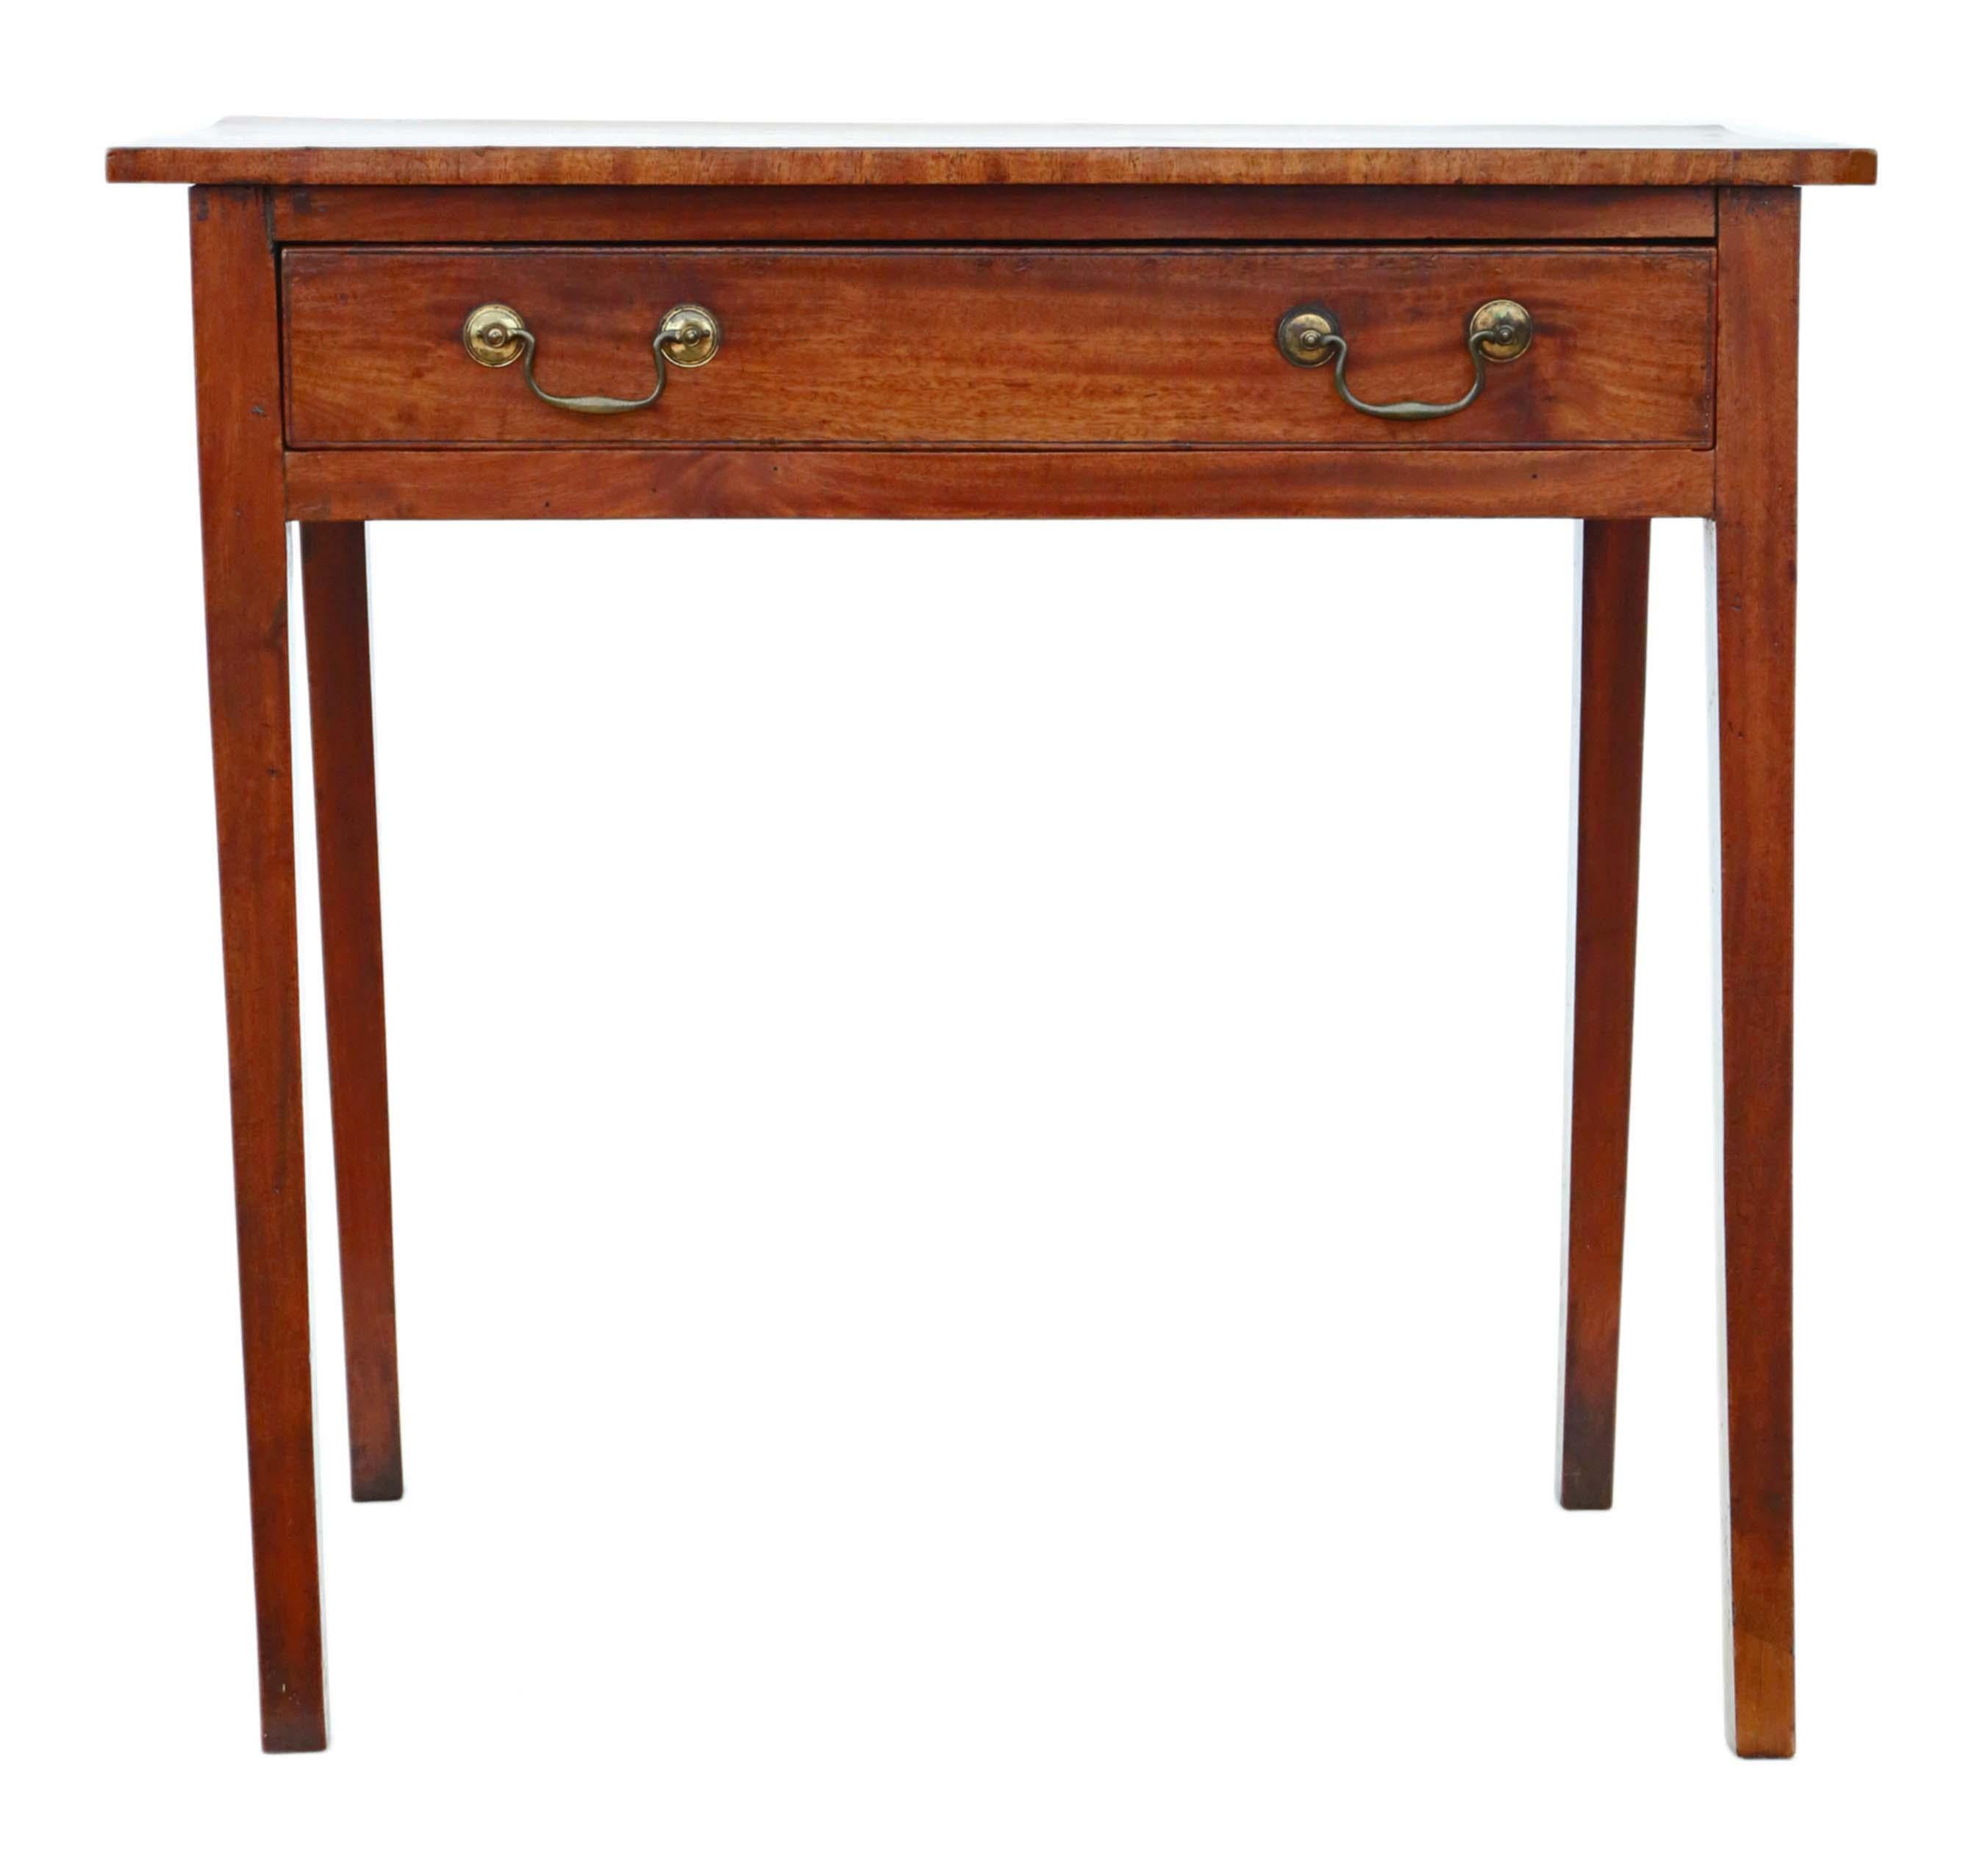 Antique Georgian circa 1800 cross-banded mahogany desk writing side table.
No loose joints. Full of age, character and charm. The drawer slides freely (later compartmentalisation).
Would look great in the right location! A charming, characterful